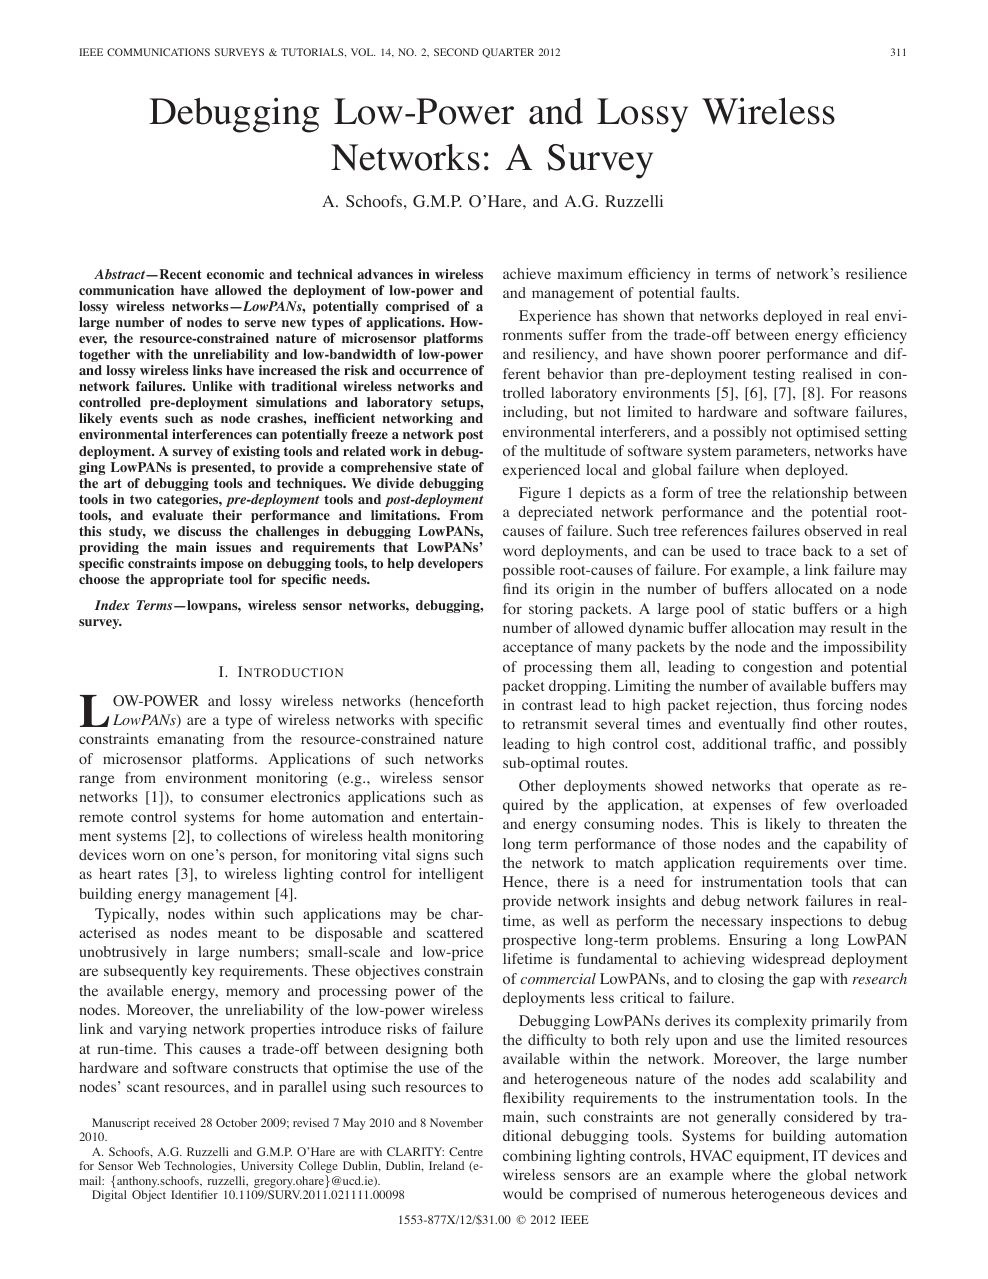 wireless network research topics